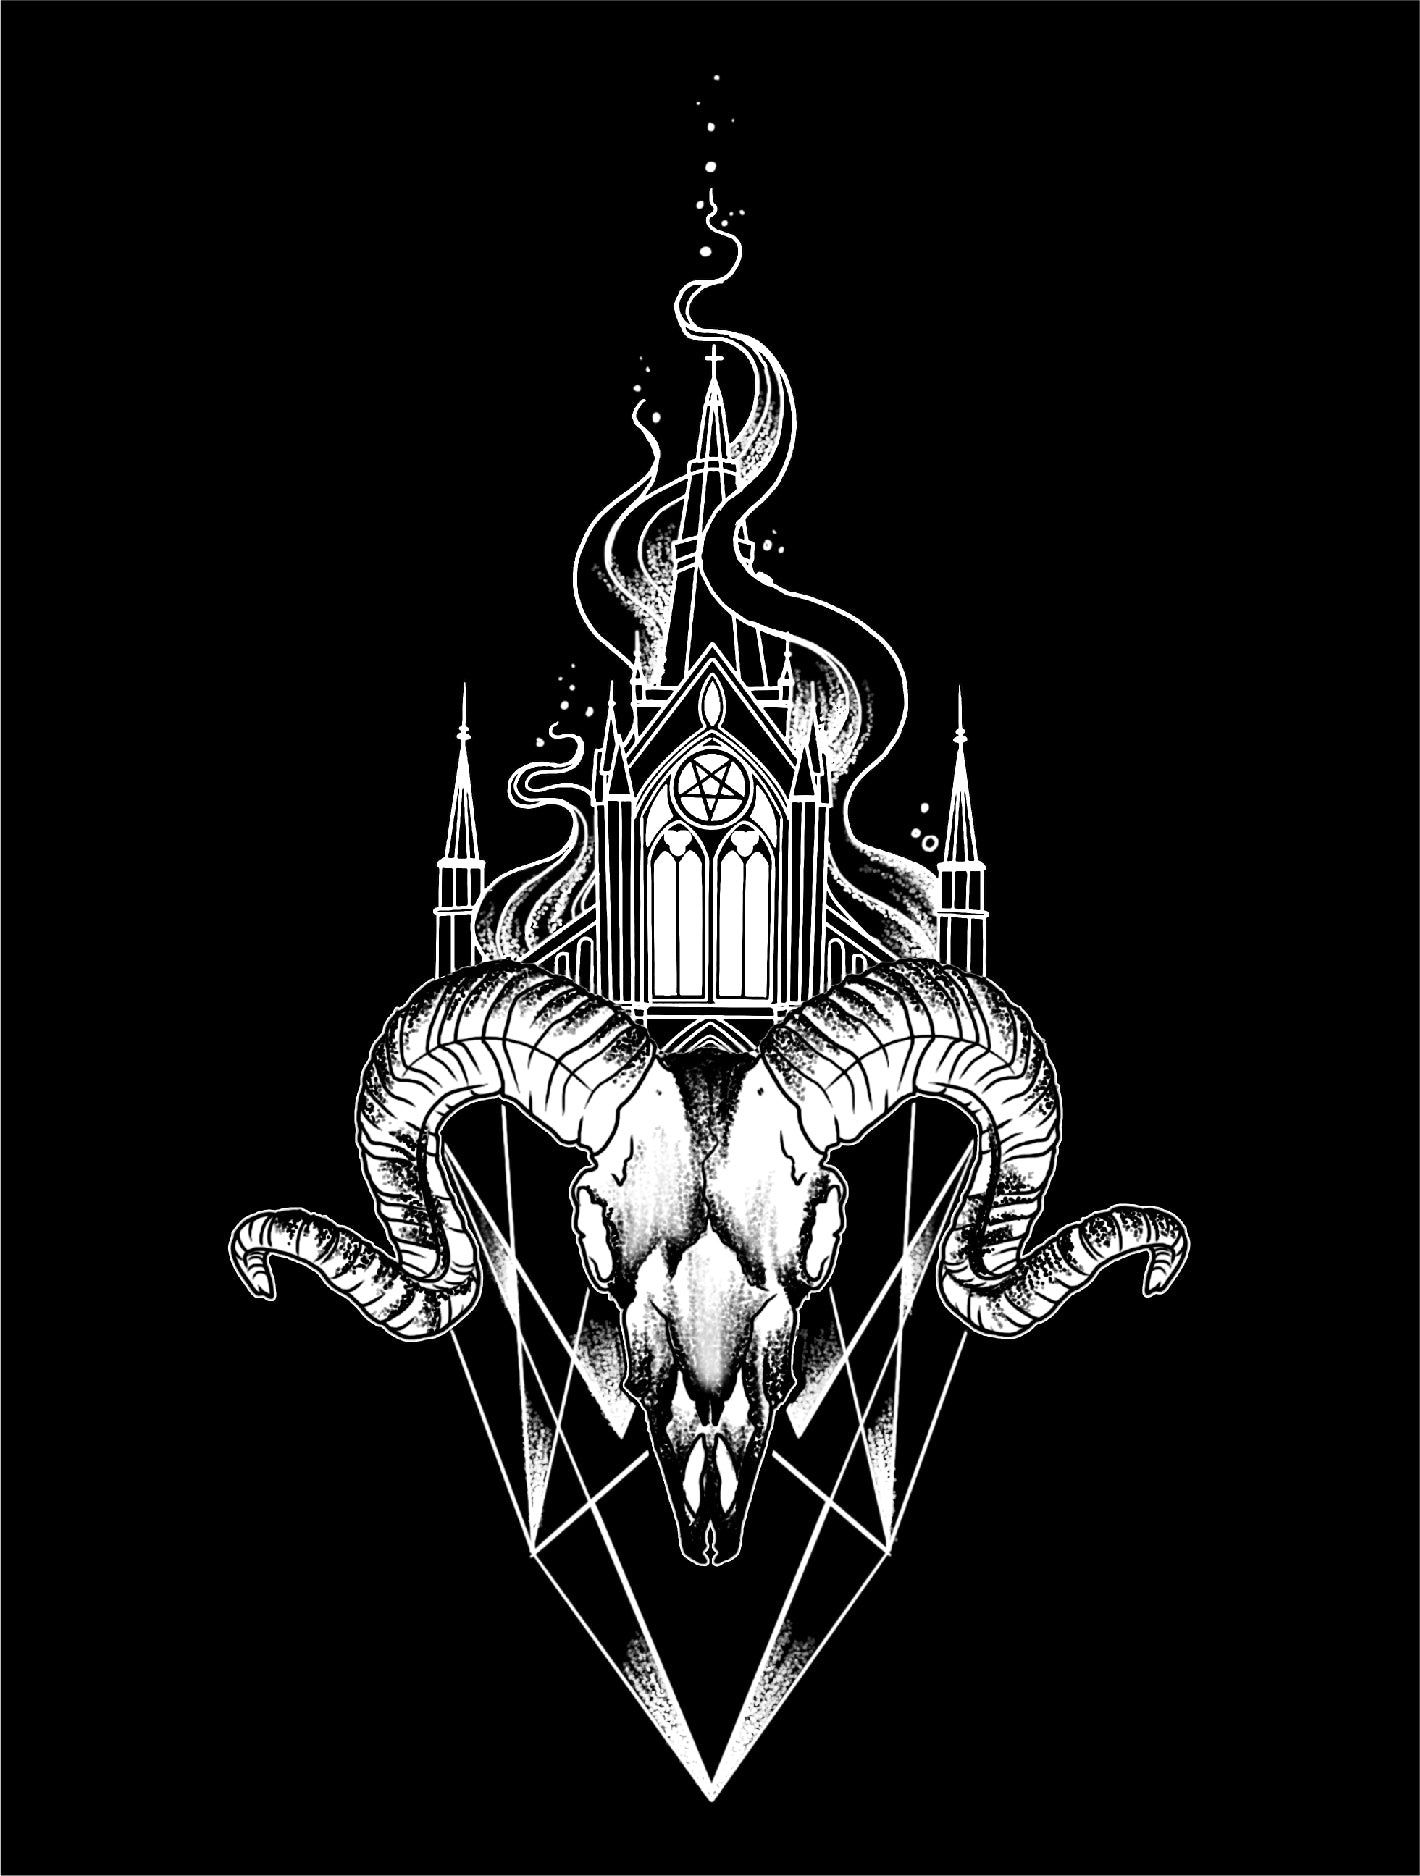 Image of ram skull below solemn building but above a crystal, in white on a black background. Art by Stephanie Johnson. 